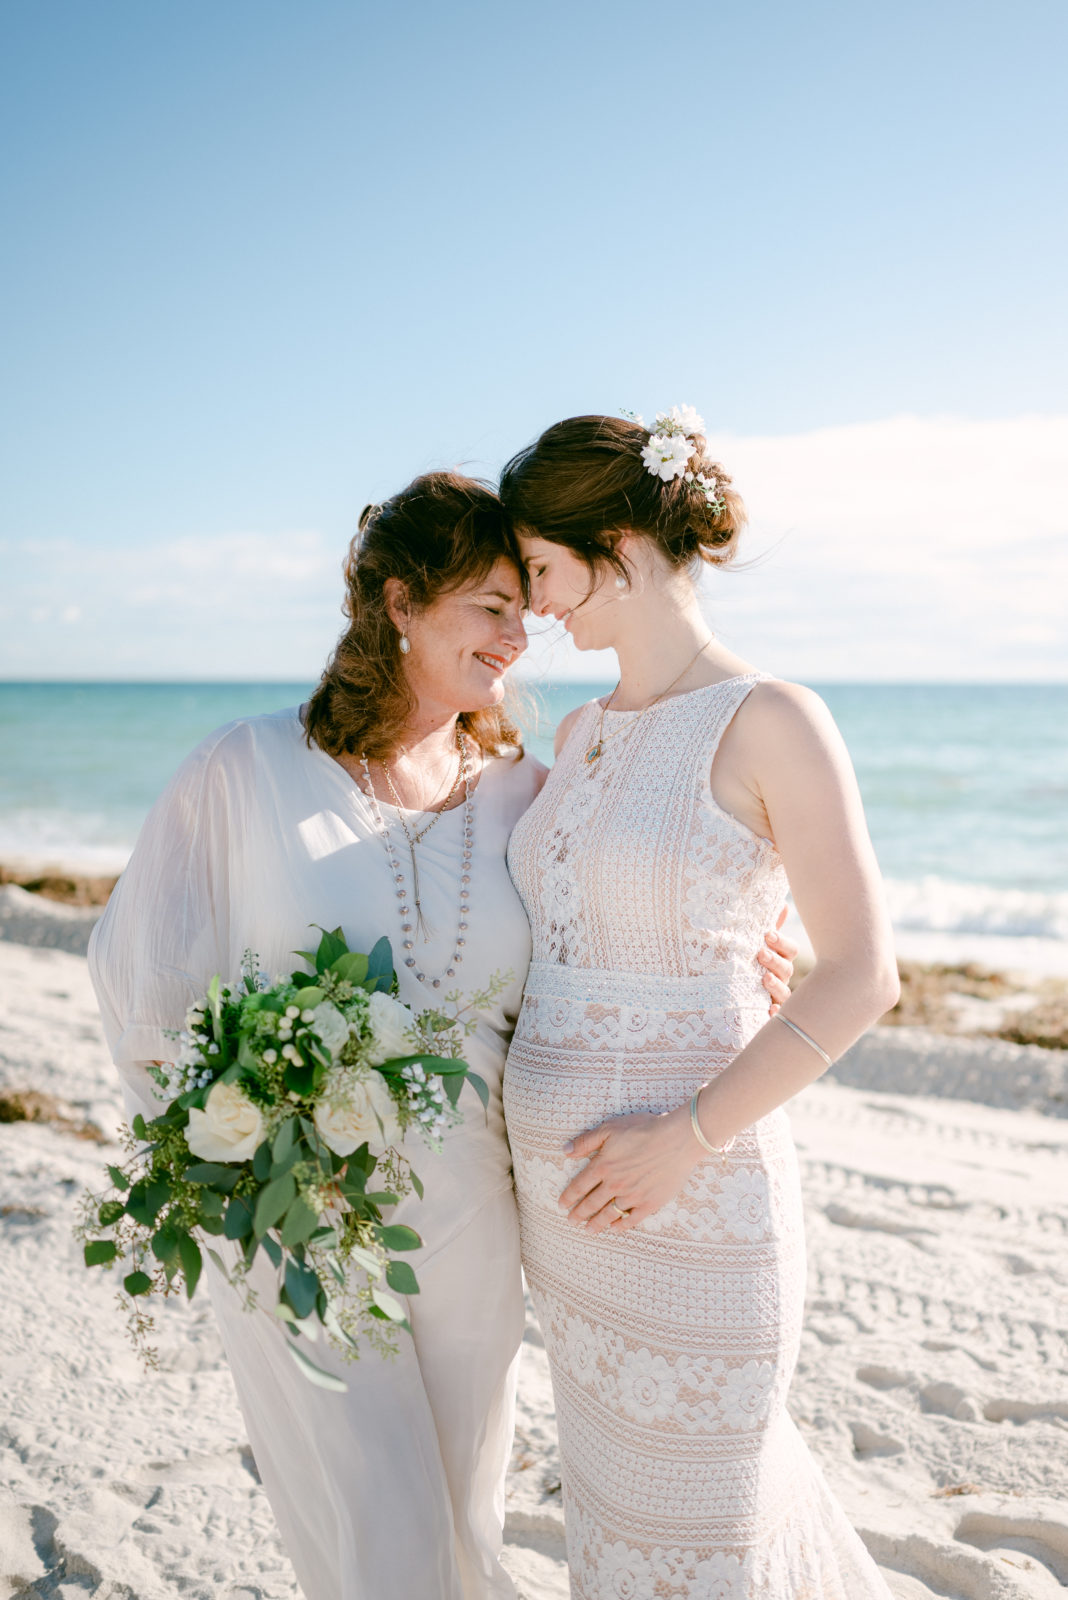 Mom and her bride daughter on the beach